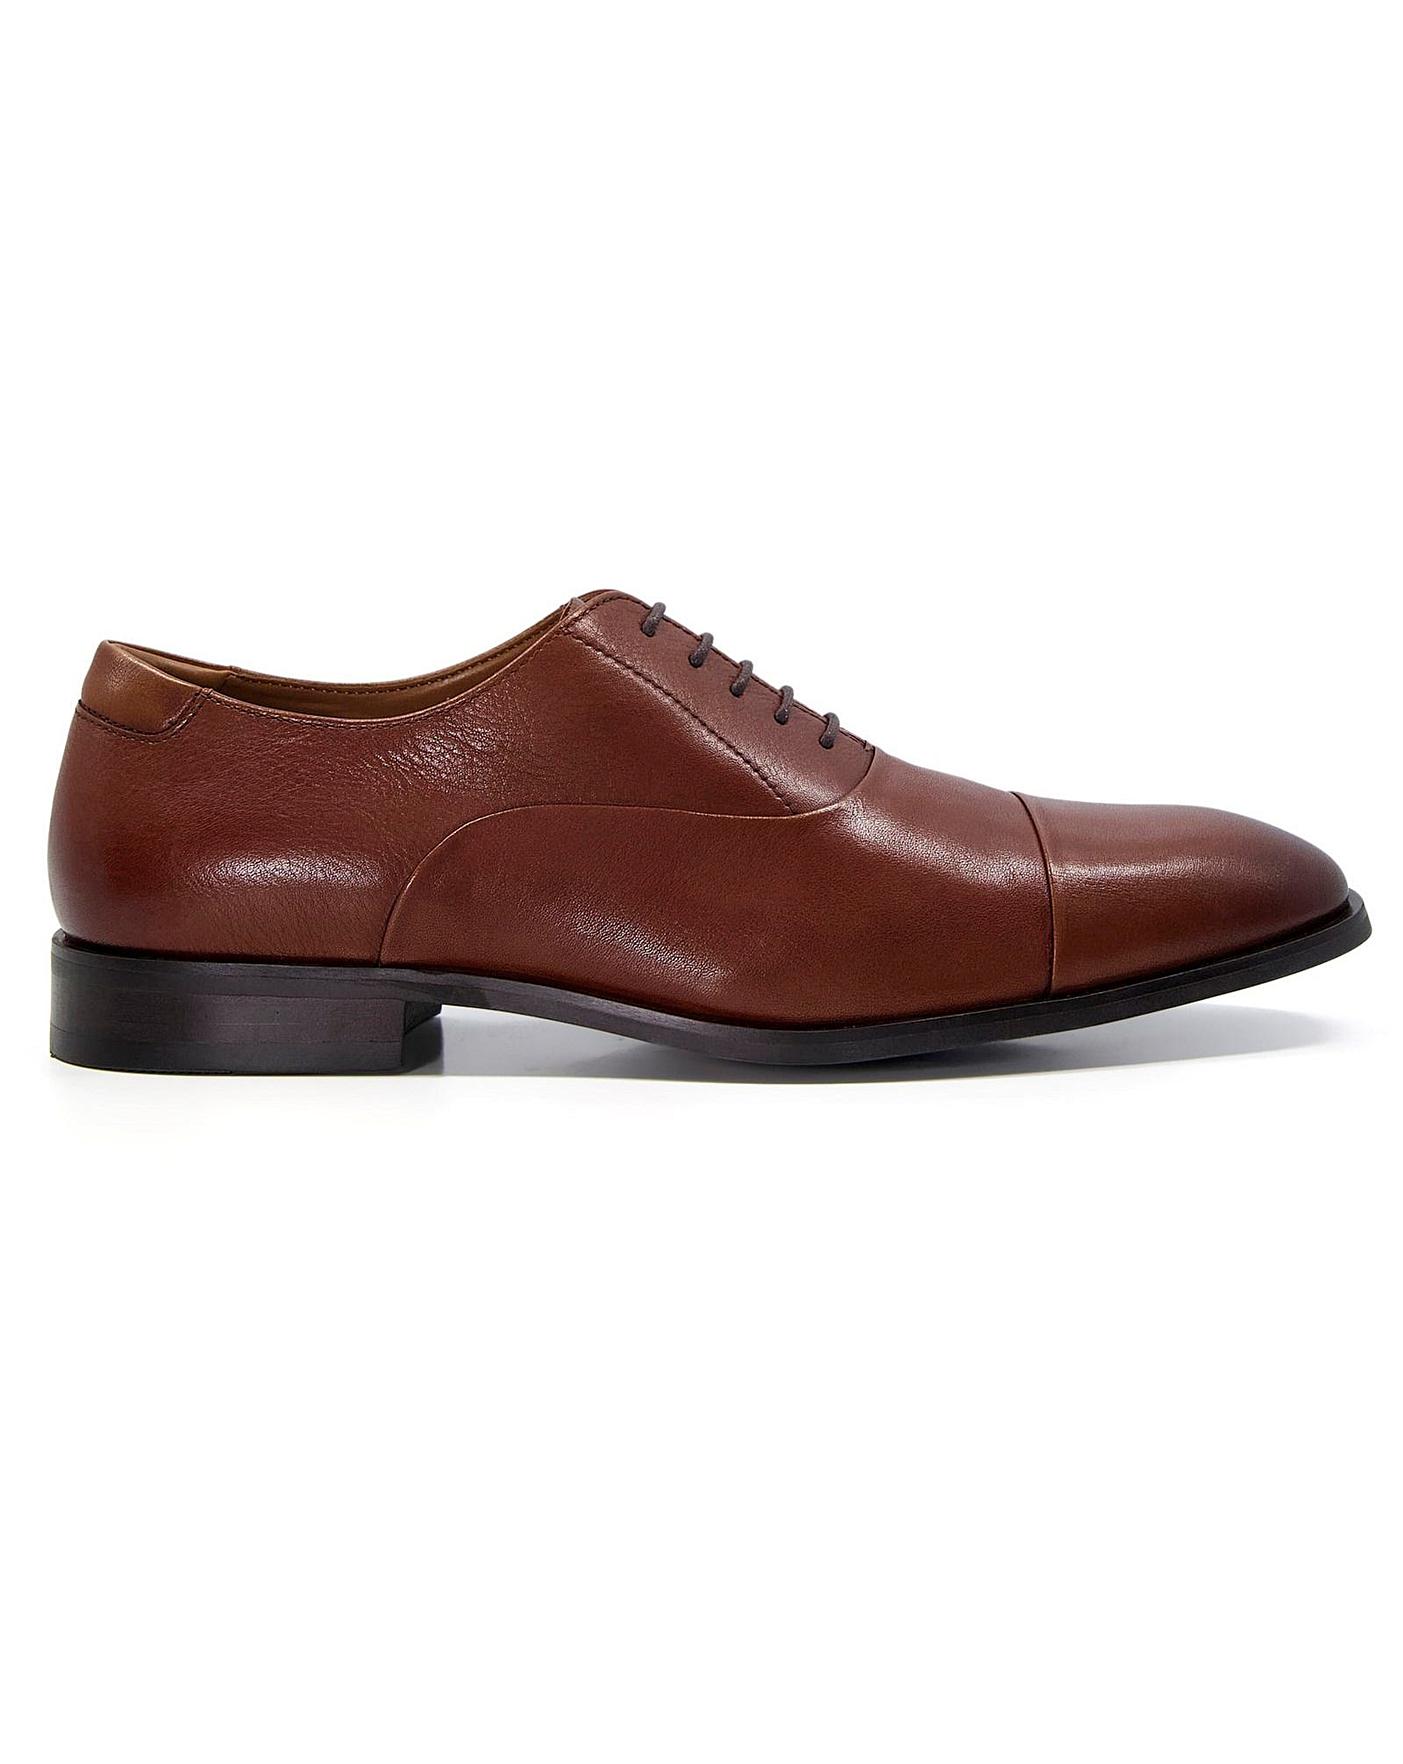 Secrecy Oxford Shoes